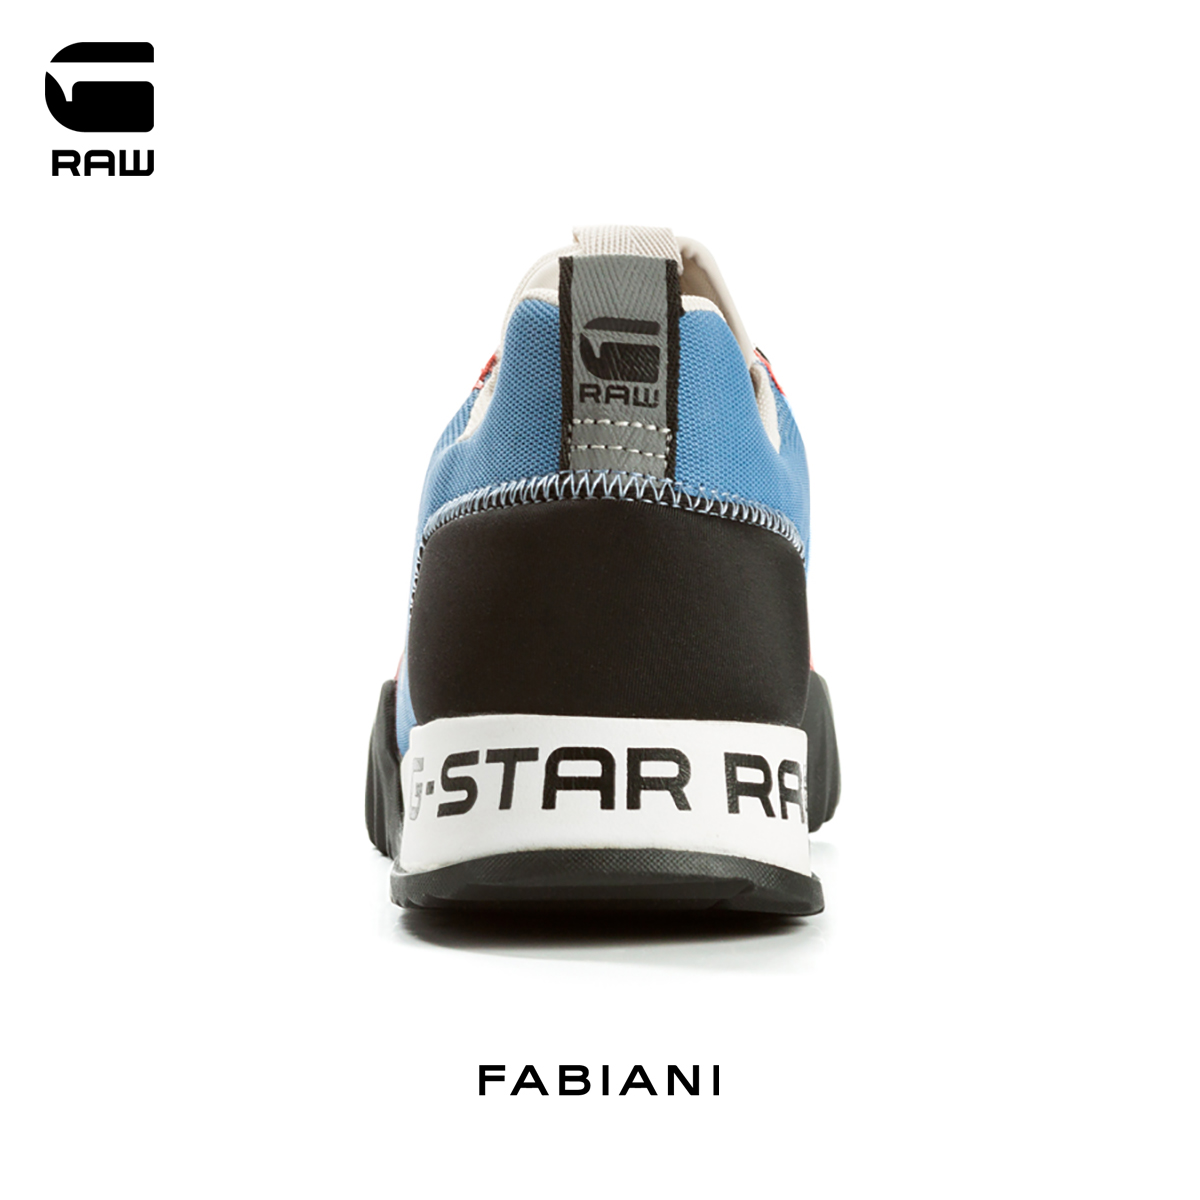 fabiani shoes prices